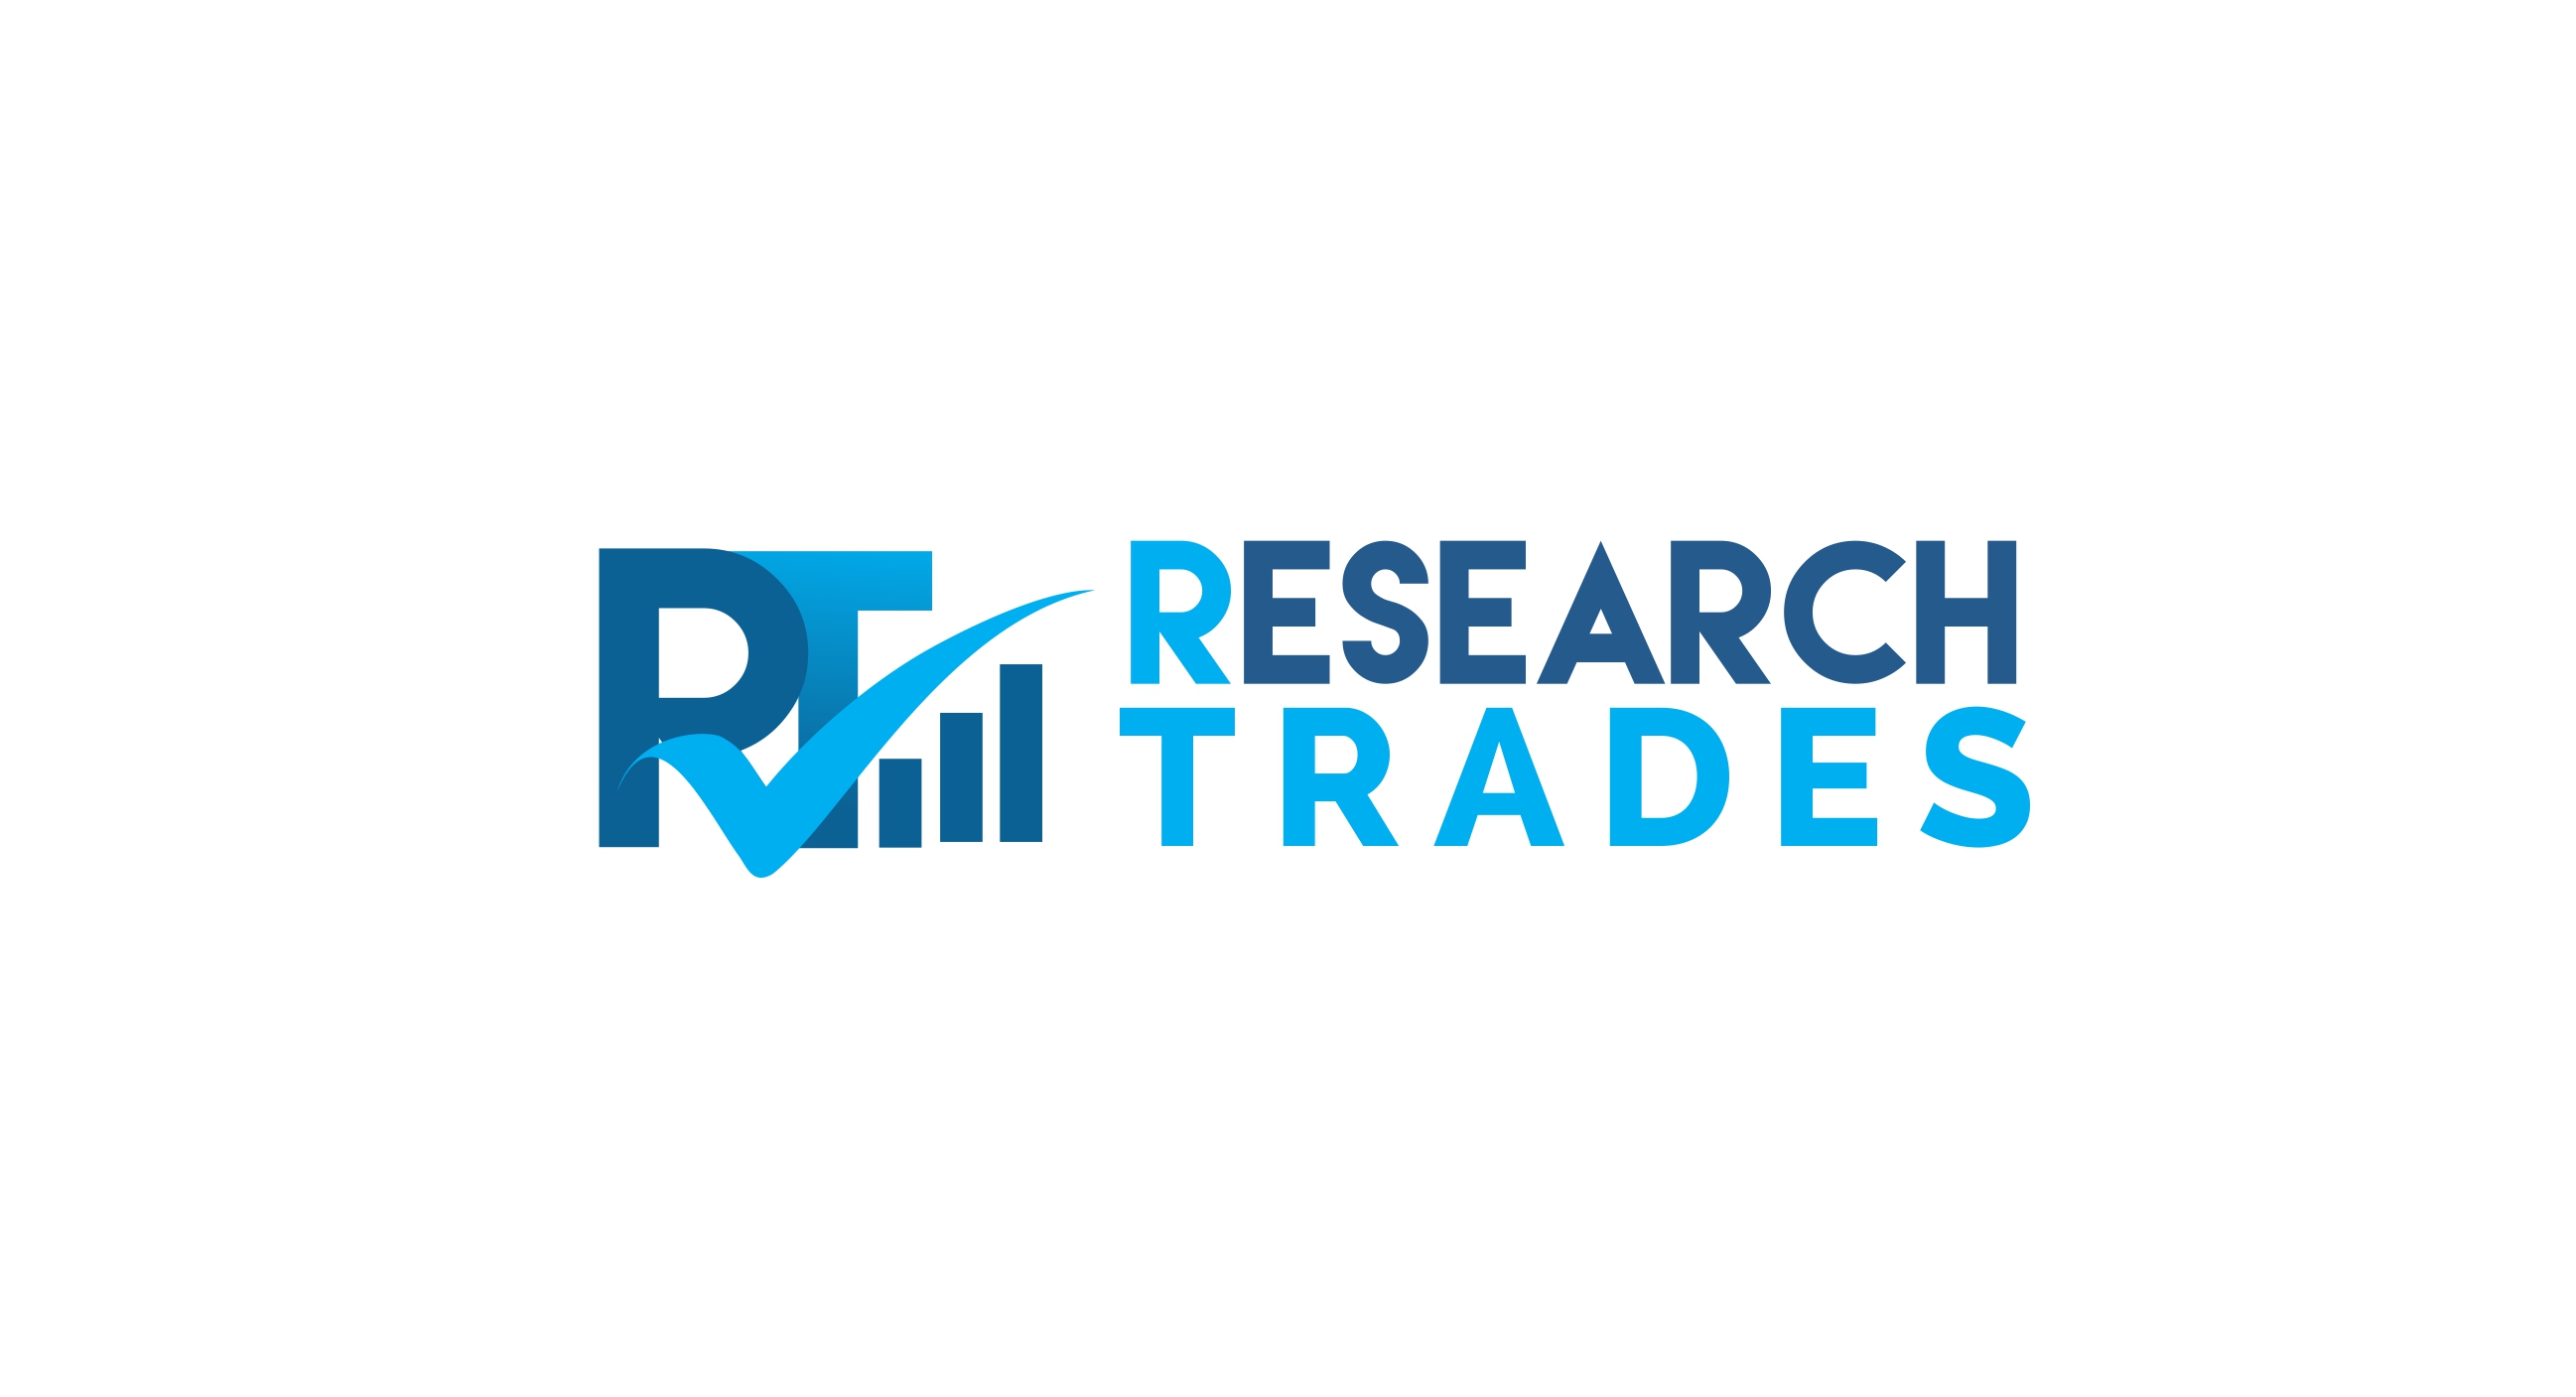 Europe ERP Software Market Demand Analysis By Top Key Players Like SAP, Oracle, Sage, Microsoft, Netsuite, IBM and Others 2017 - 2022